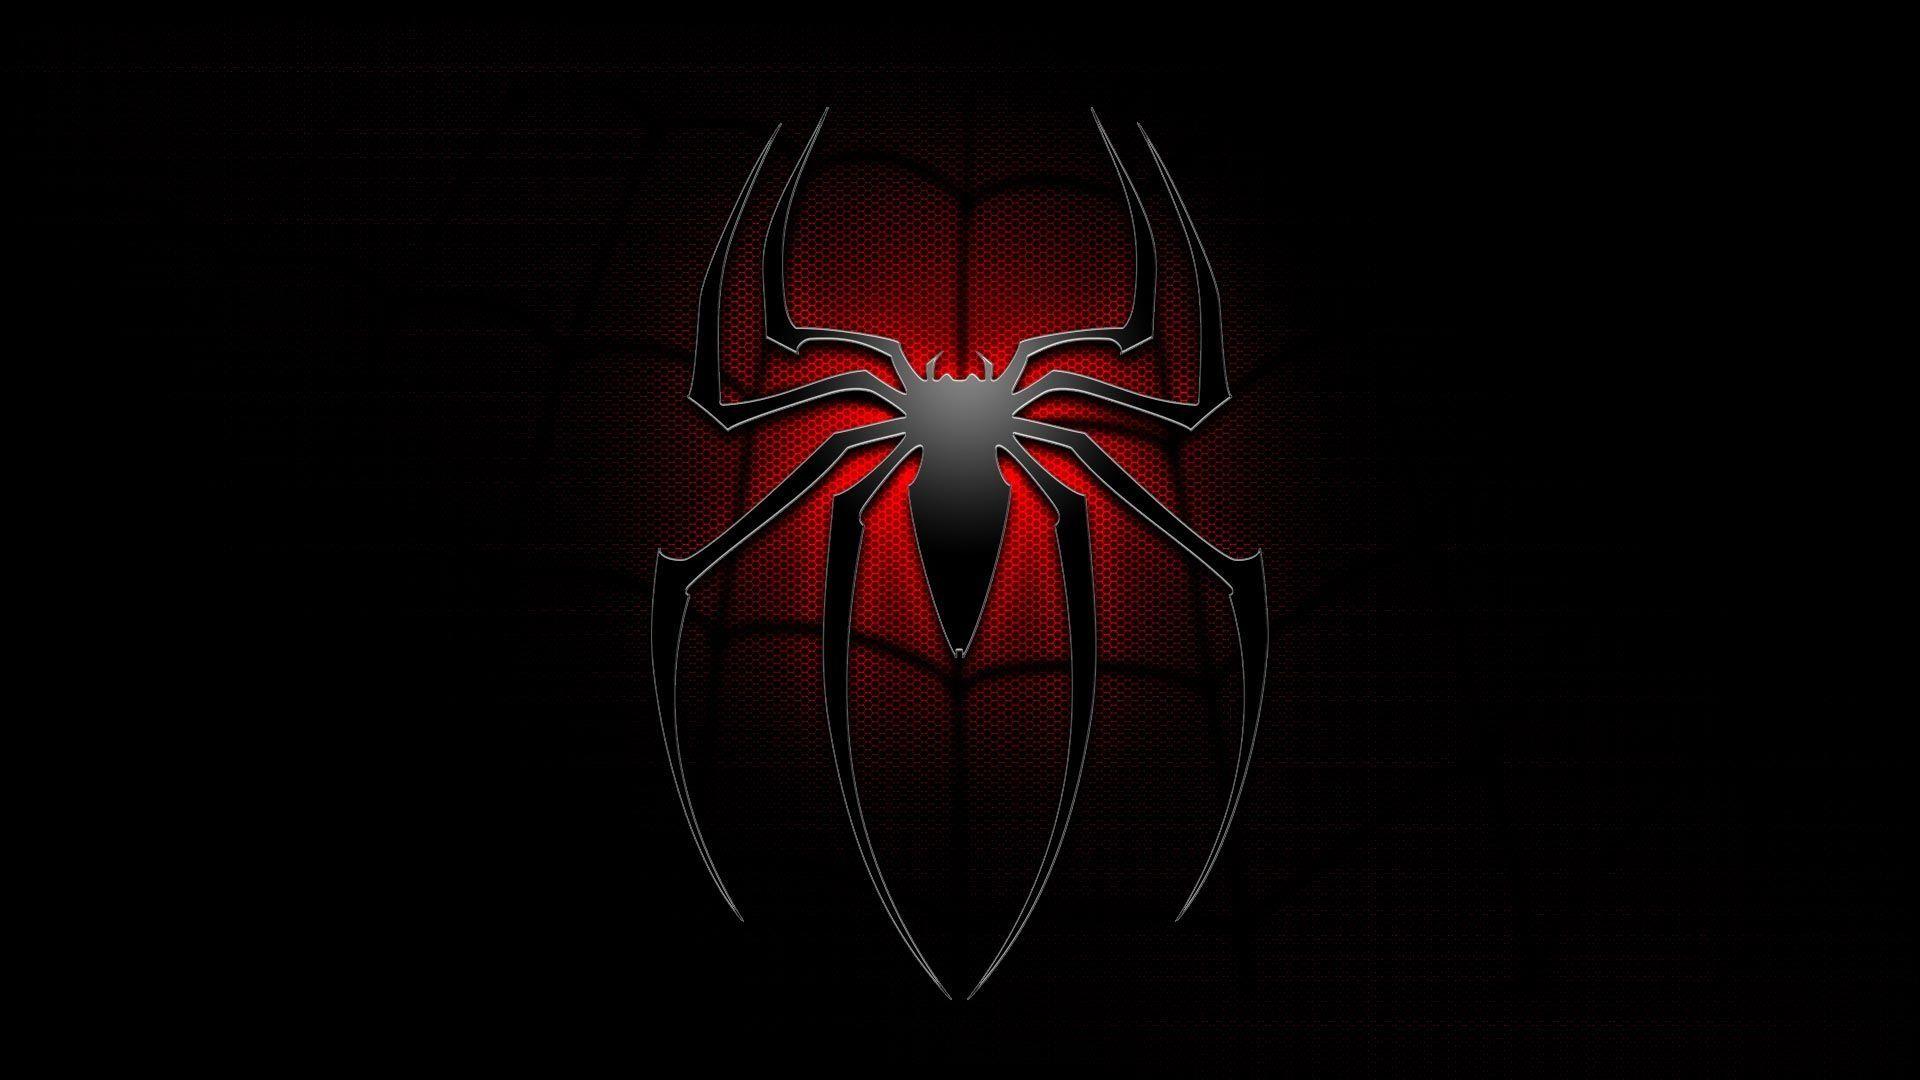 Best Of Black Widow Spider Wallpaper HD. The Black Posters